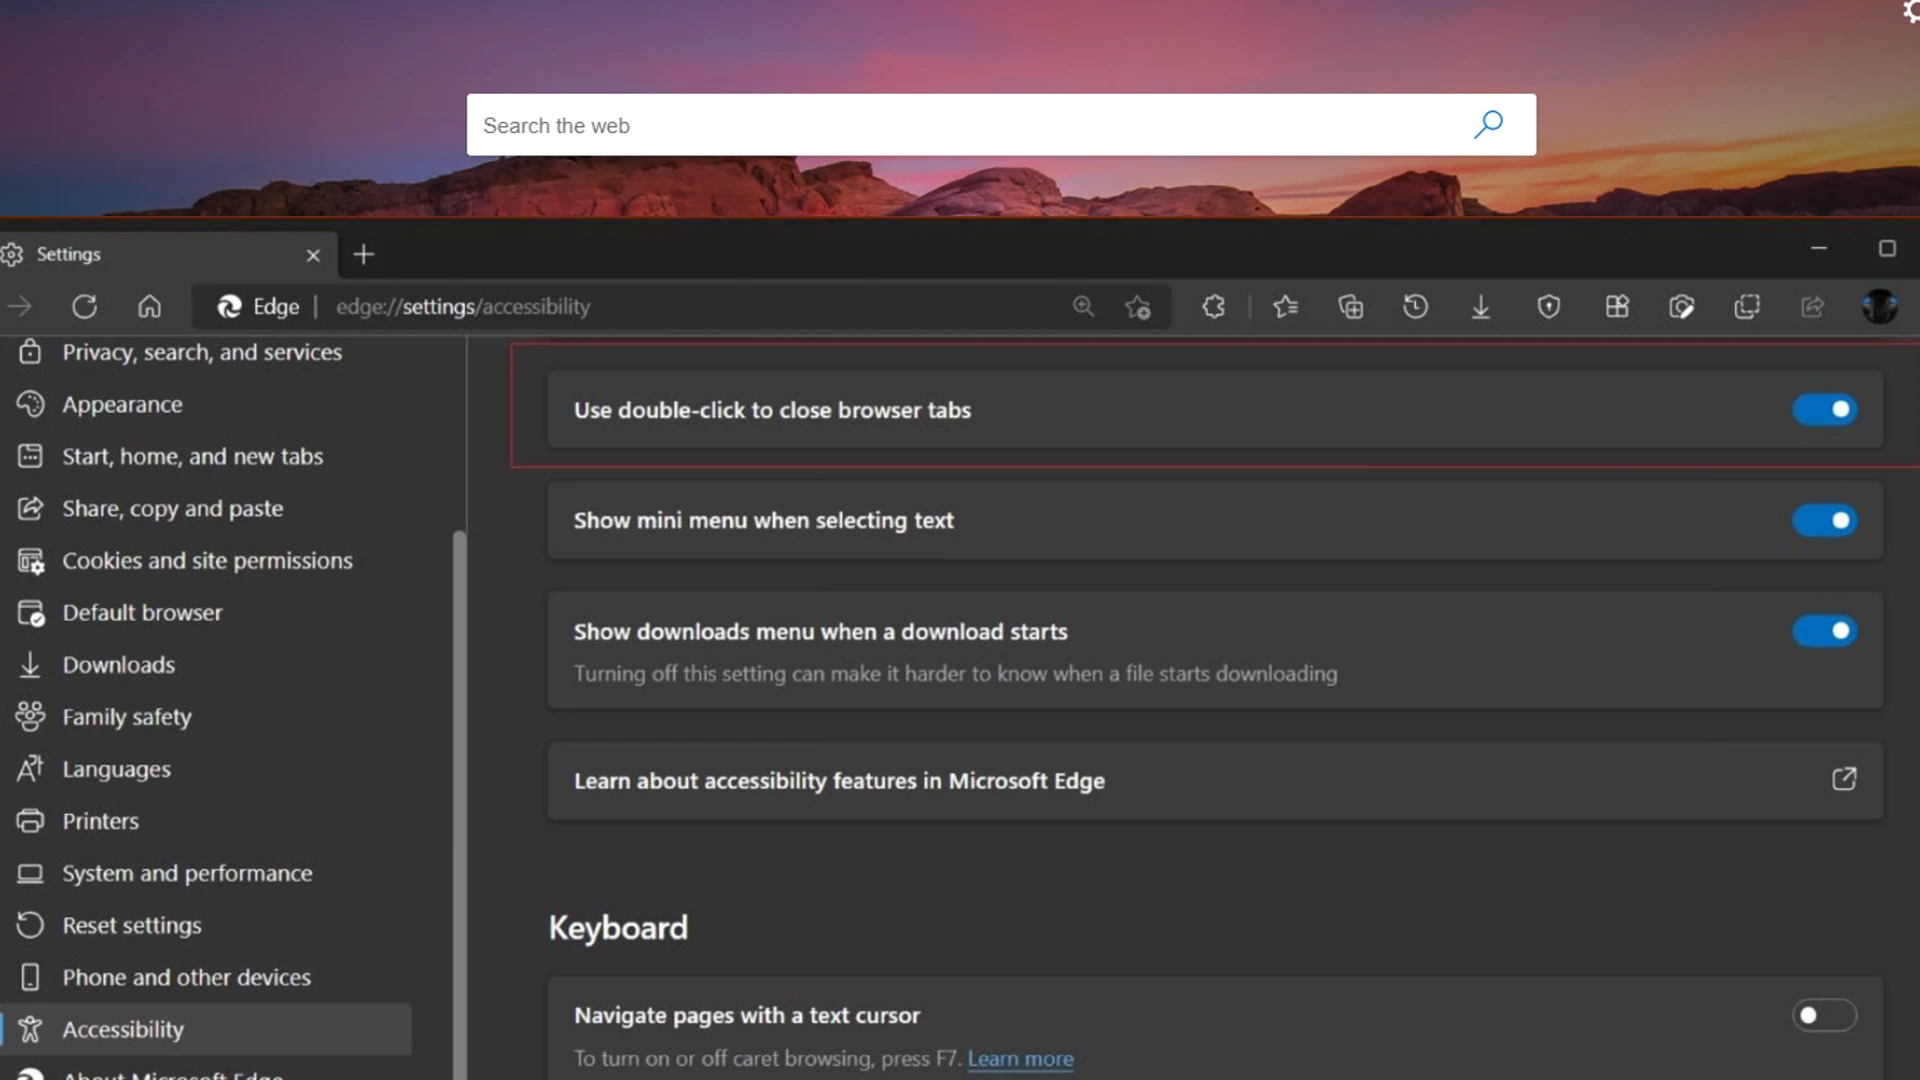 Microsoft Edge will soon allow you to close tabs by double clicking